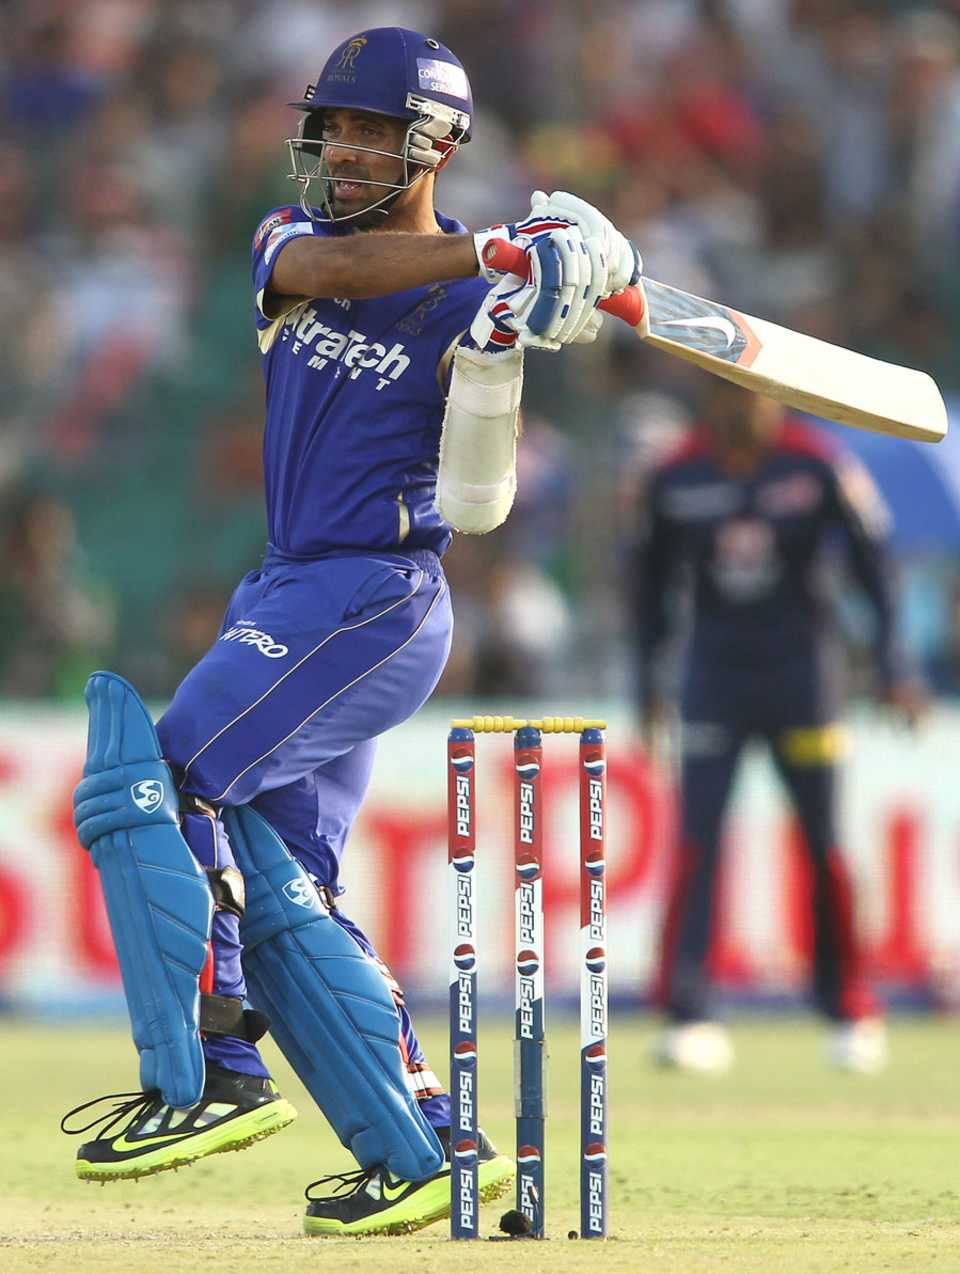 Ajinkya Rahane was Man-of-the-Match for the second consecutive match